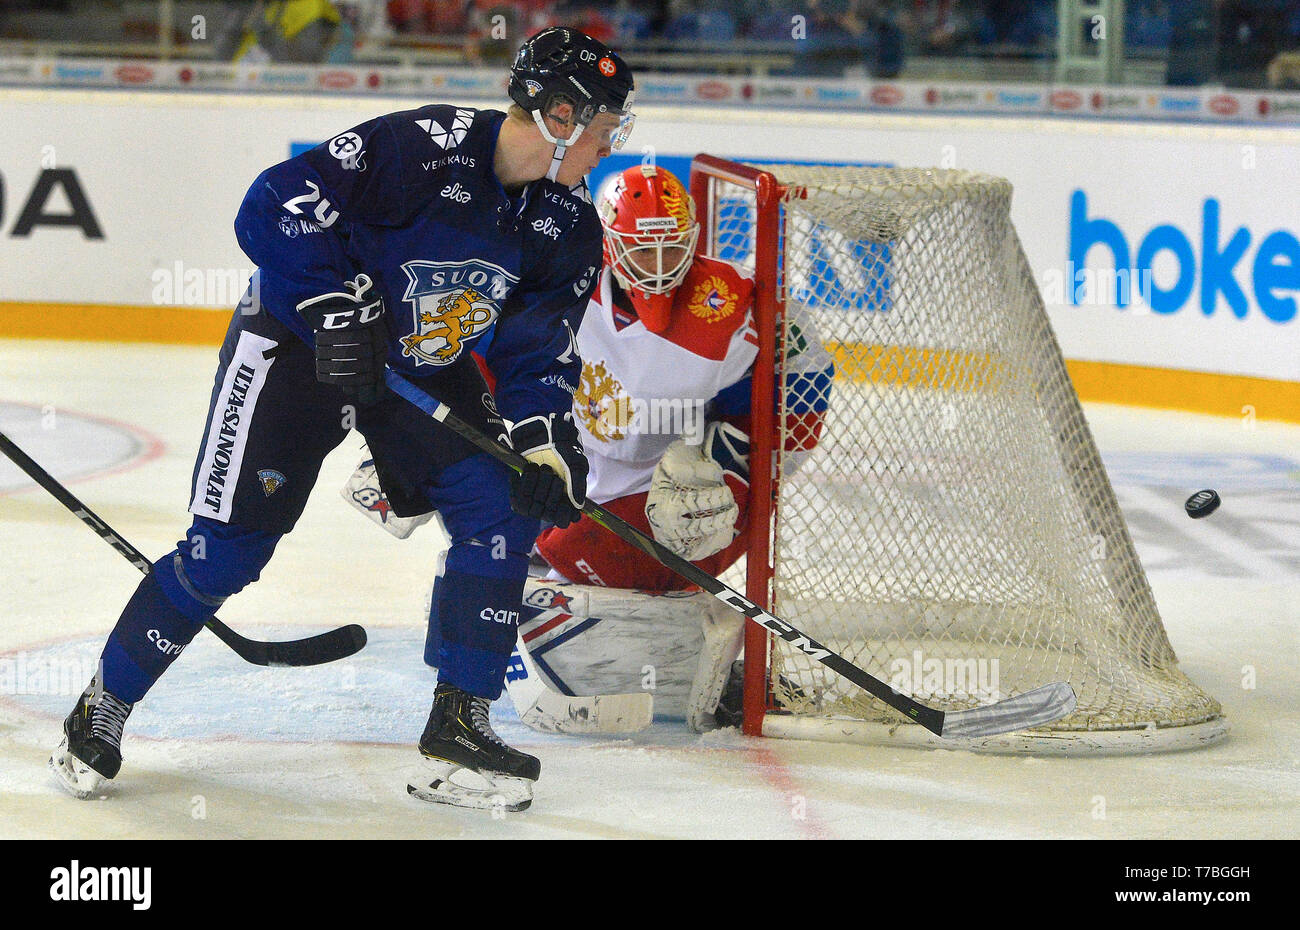 Brno, Czech Republic. 04th May, 2019. L-R Kaapo Kakko (FIN) and goalkeeper Alexandar Georgiyev (RUS) in action during the Russia vs Finland match within Carlson Hockey Games tournament, part of Euro Hockey Tour in Brno, Czech Republic, May 5, 2019. Credit: Lubos Pavlicek/CTK Photo/Alamy Live News Stock Photo